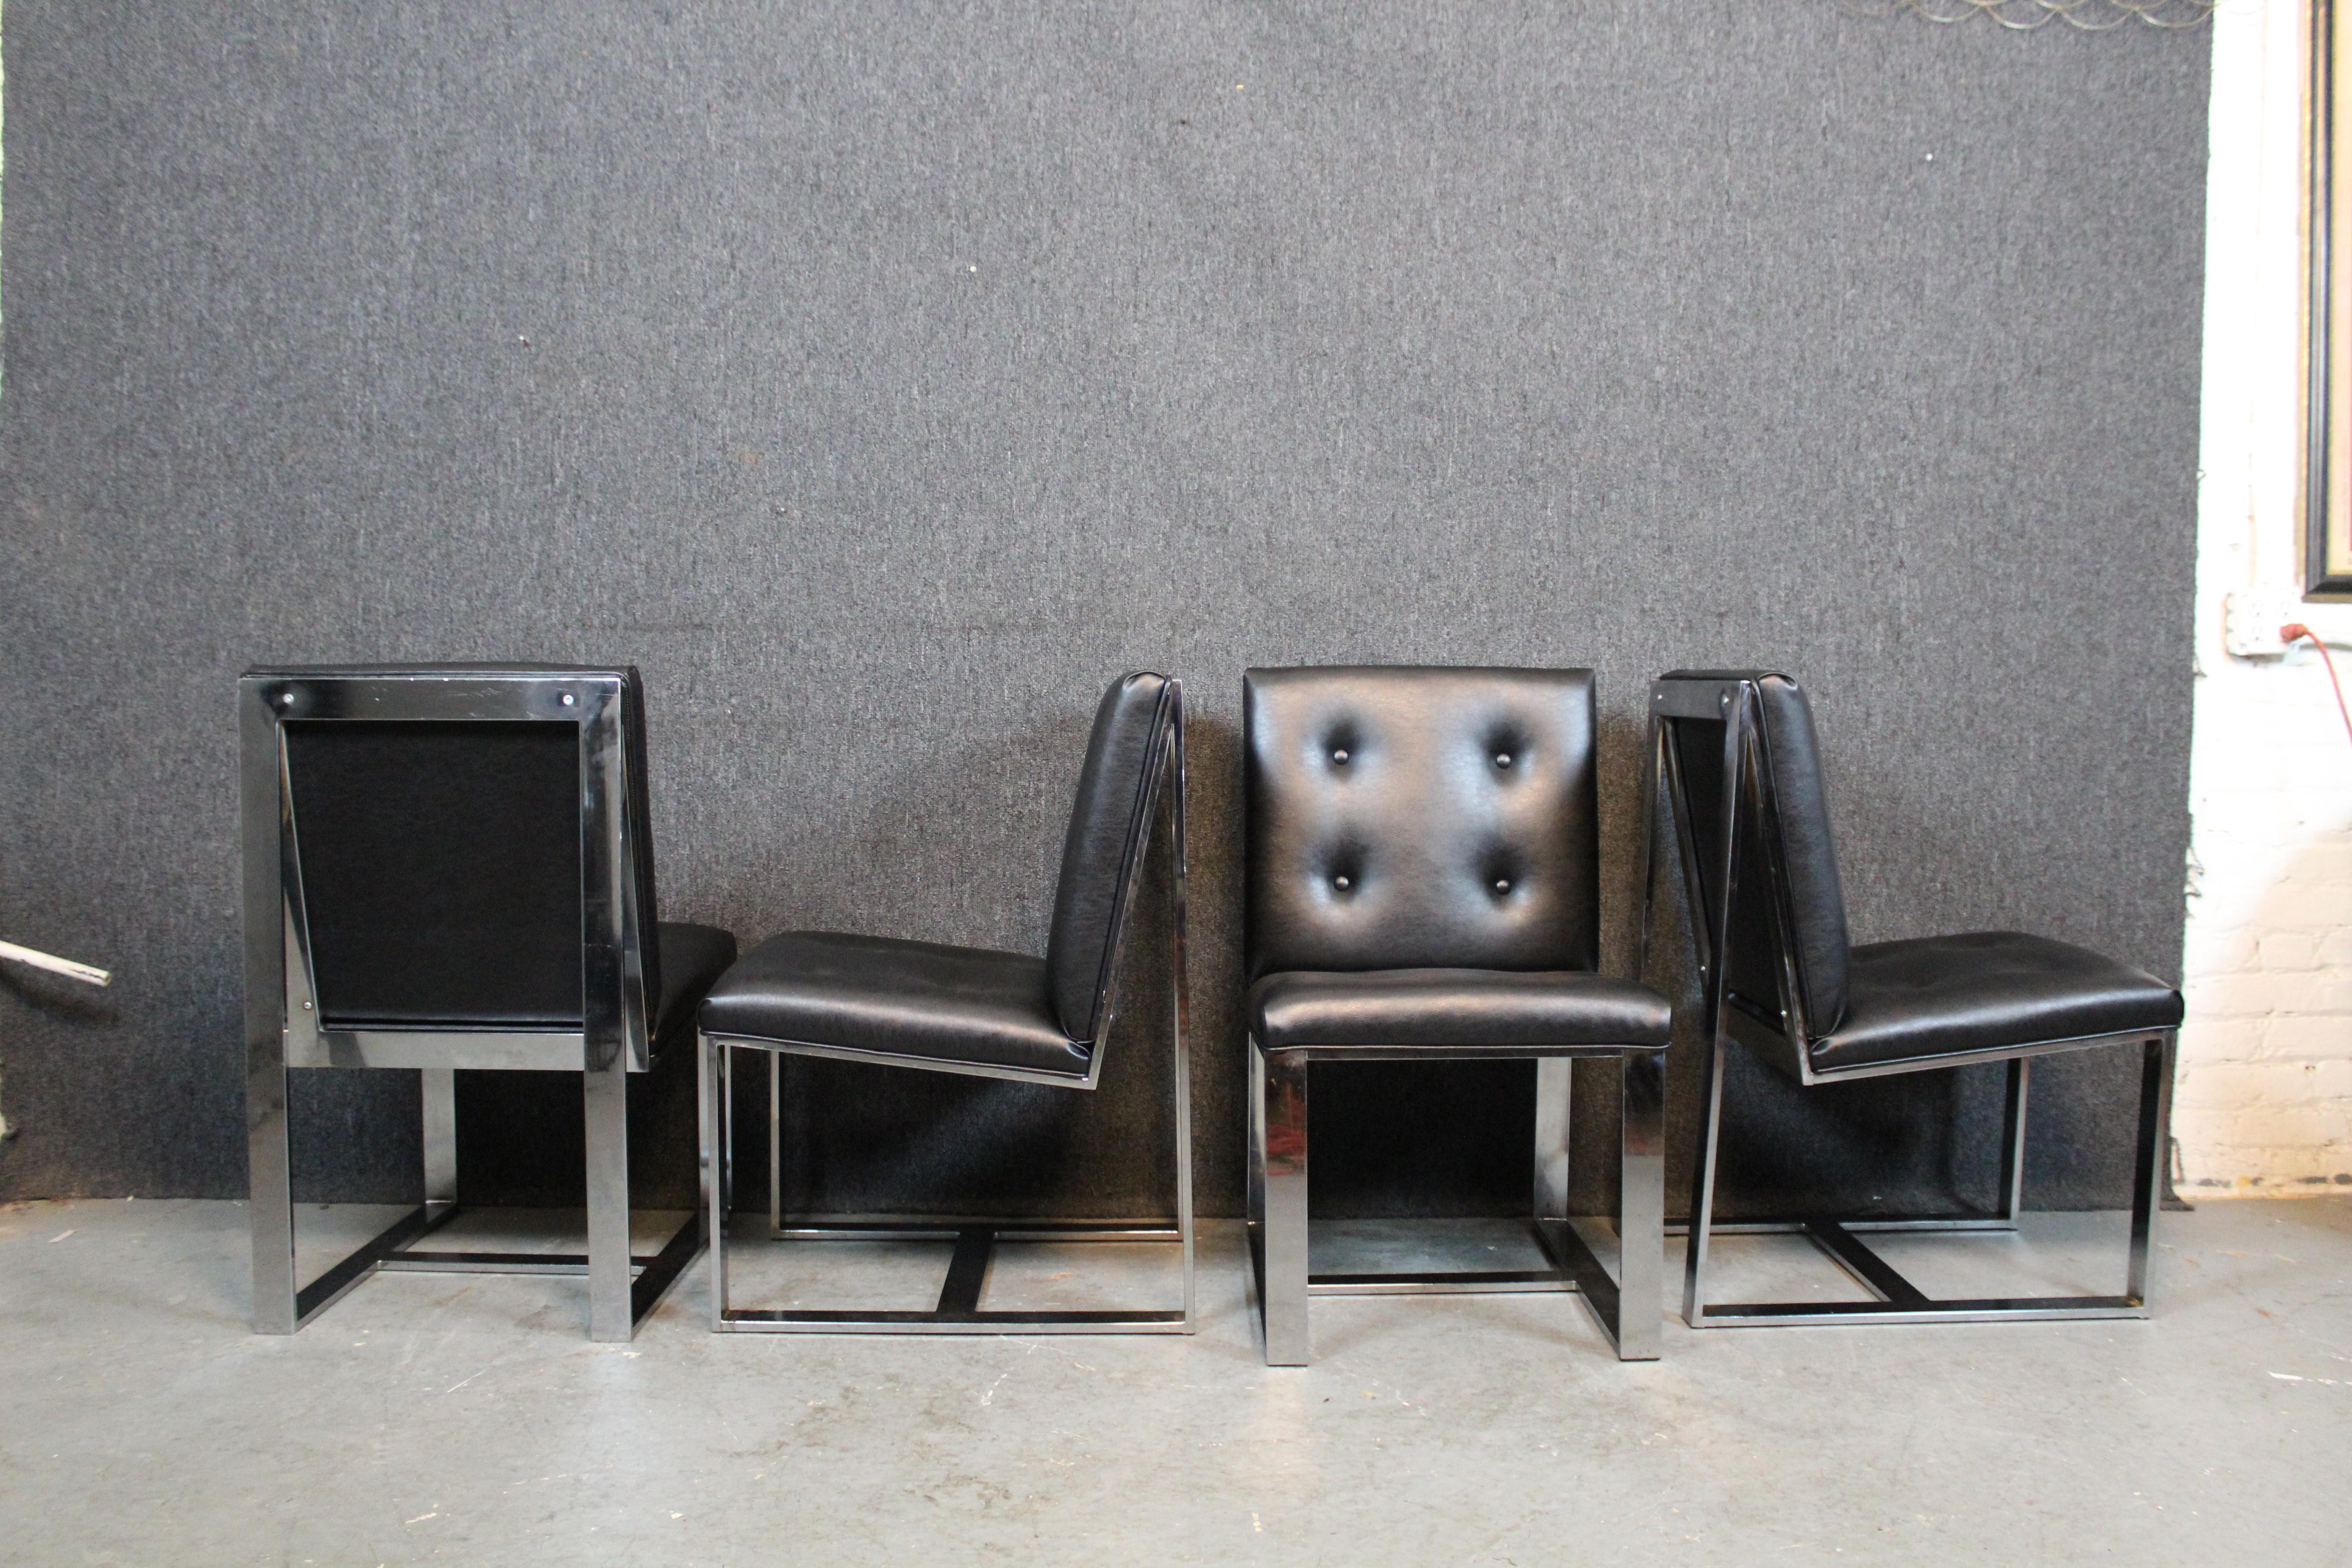 Don't miss out on your chance to take home a rare & robust set of vintage dining chairs designed by American Mid-Century Modern master Milo Baughman for the world-renowned Thayer Coggin furniture brand. These heavy-duty chairs feature an